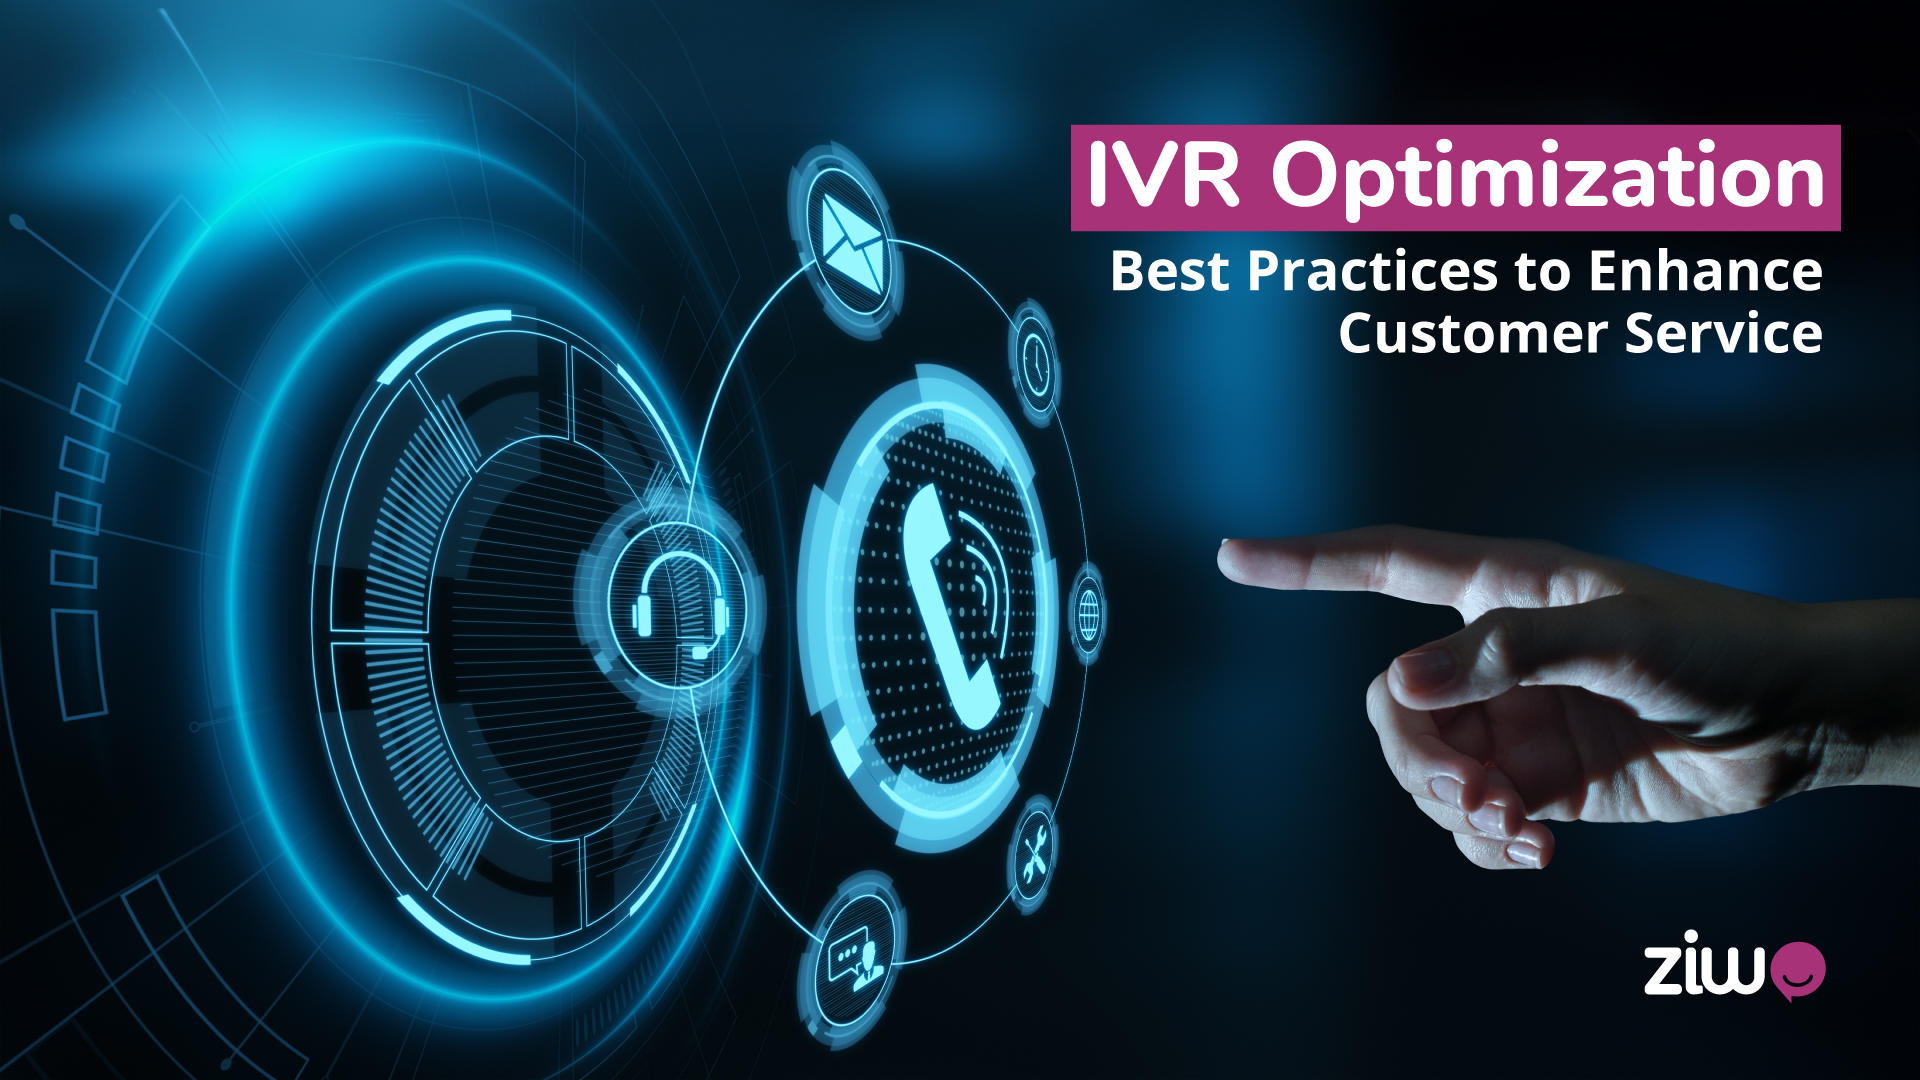 A hand pointing towards a phone logo, representing best practices for optimizing IVR outbound calls to enhance customer service